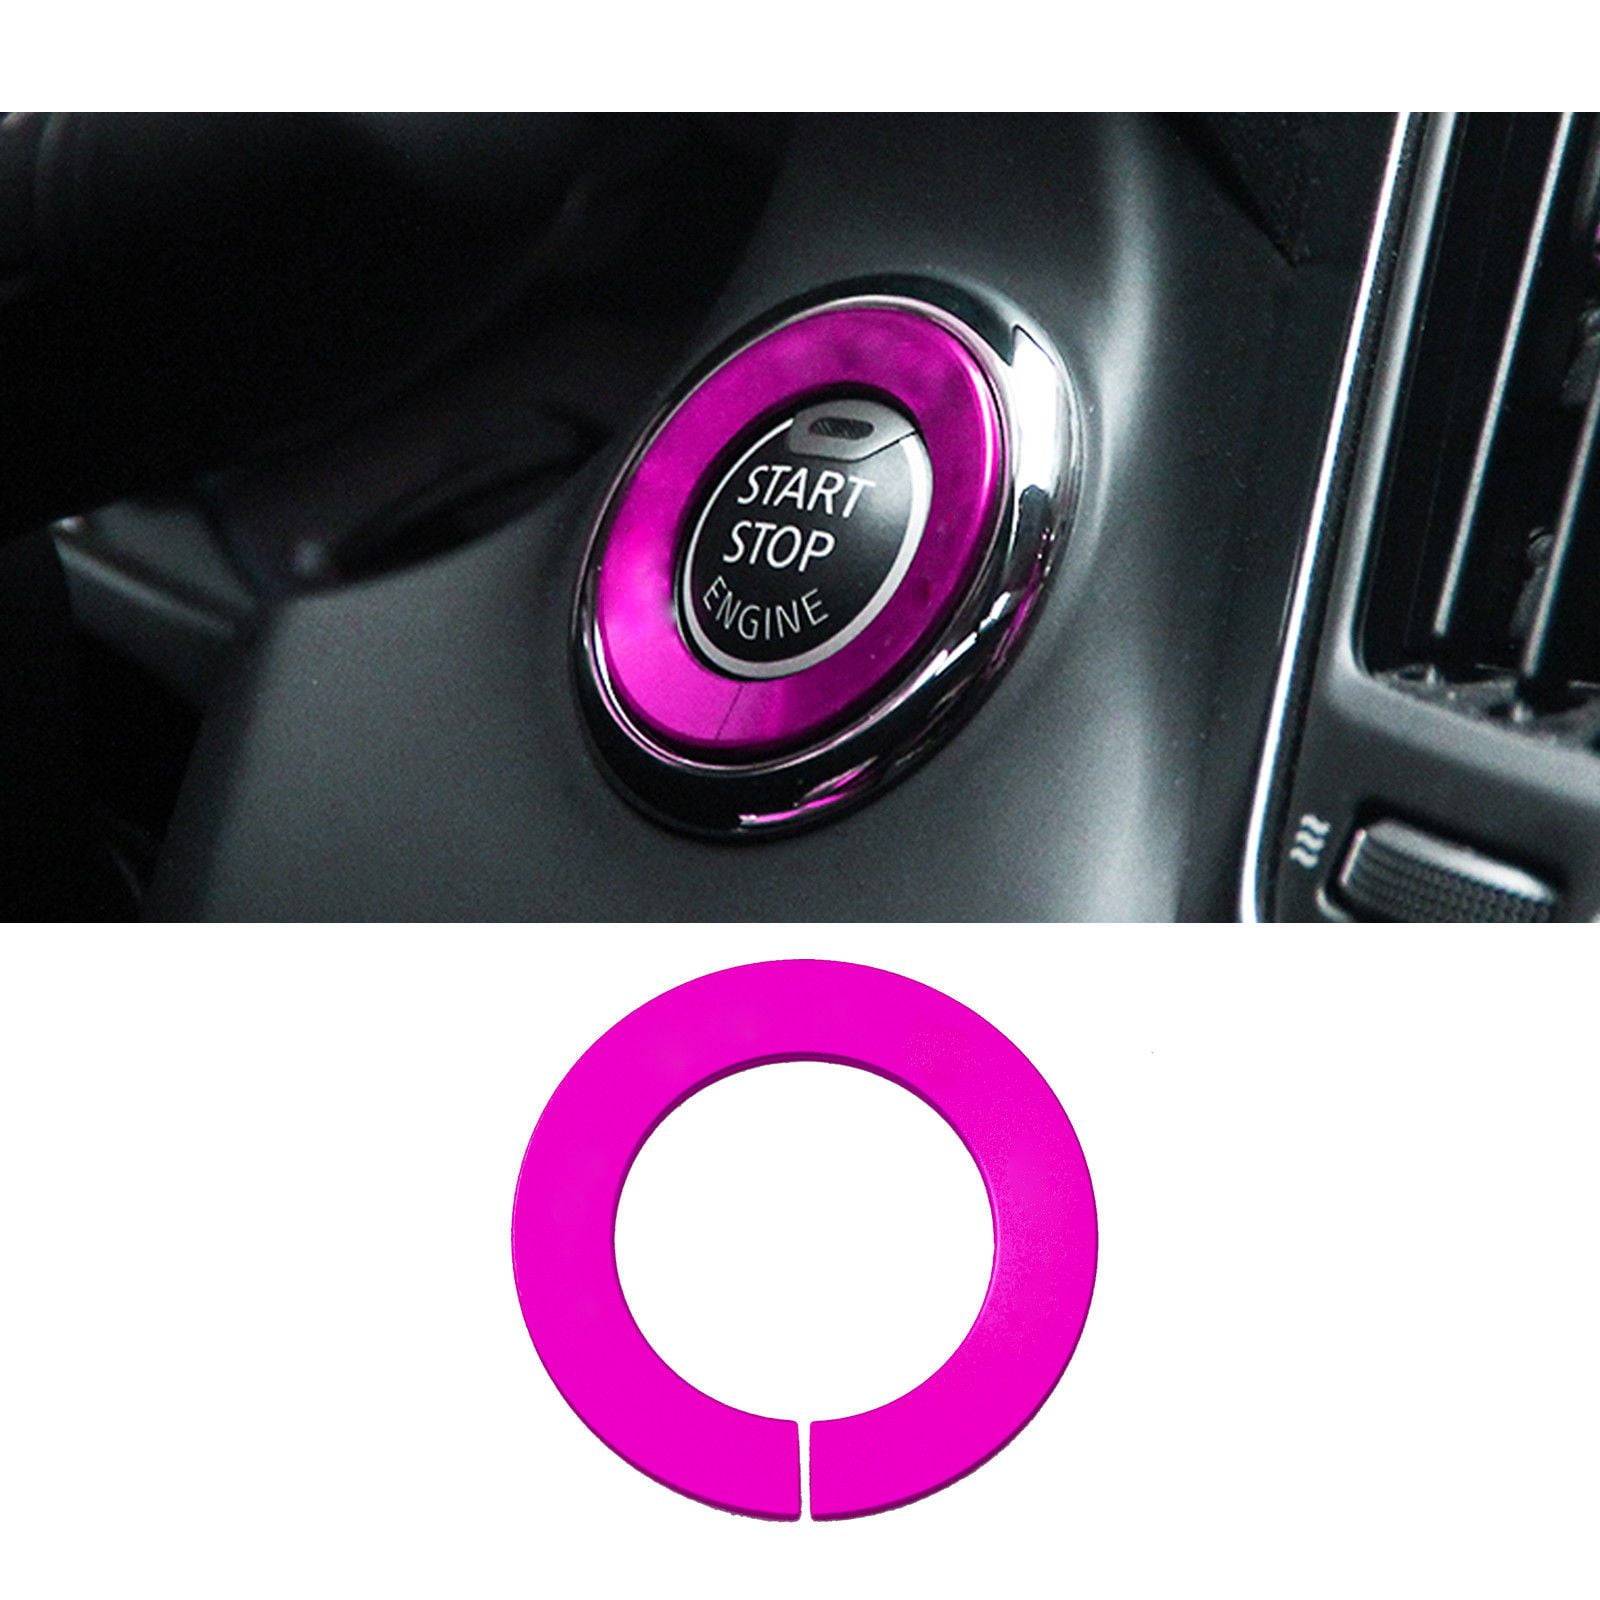 LECART 1Pc Blue Car Engine Start Stop Button Cover Ring Ignition Start Stop Button Trim Push Button Switch Decor Stickers Auto Interior Accessories Aluminum Alloy Anti-Scratch Start Stop Button Caps 